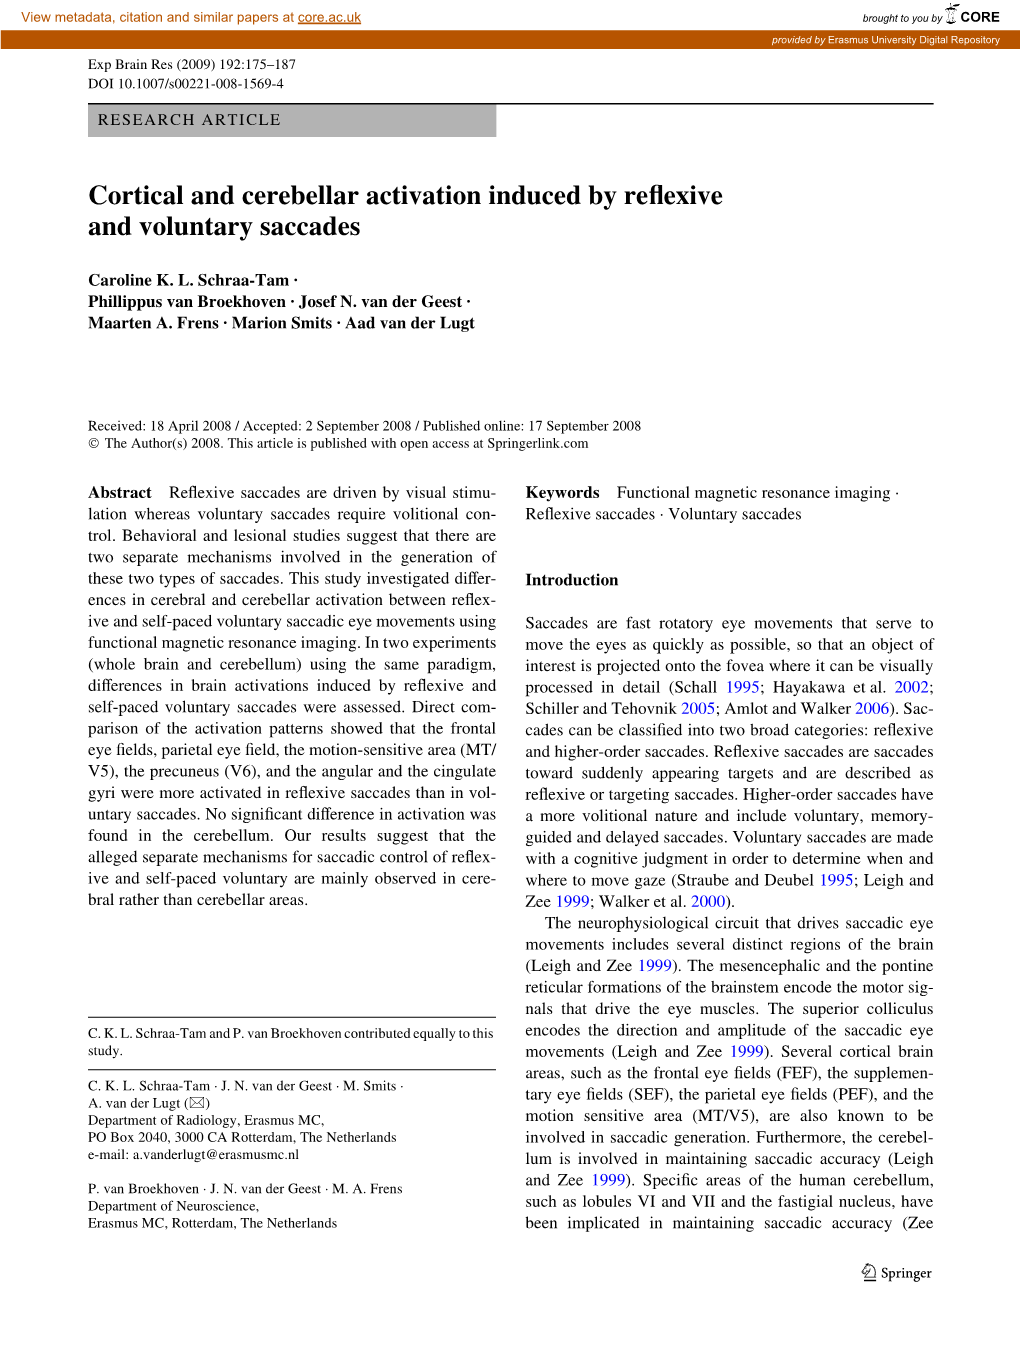 Cortical and Cerebellar Activation Induced by Rexexive and Voluntary Saccades